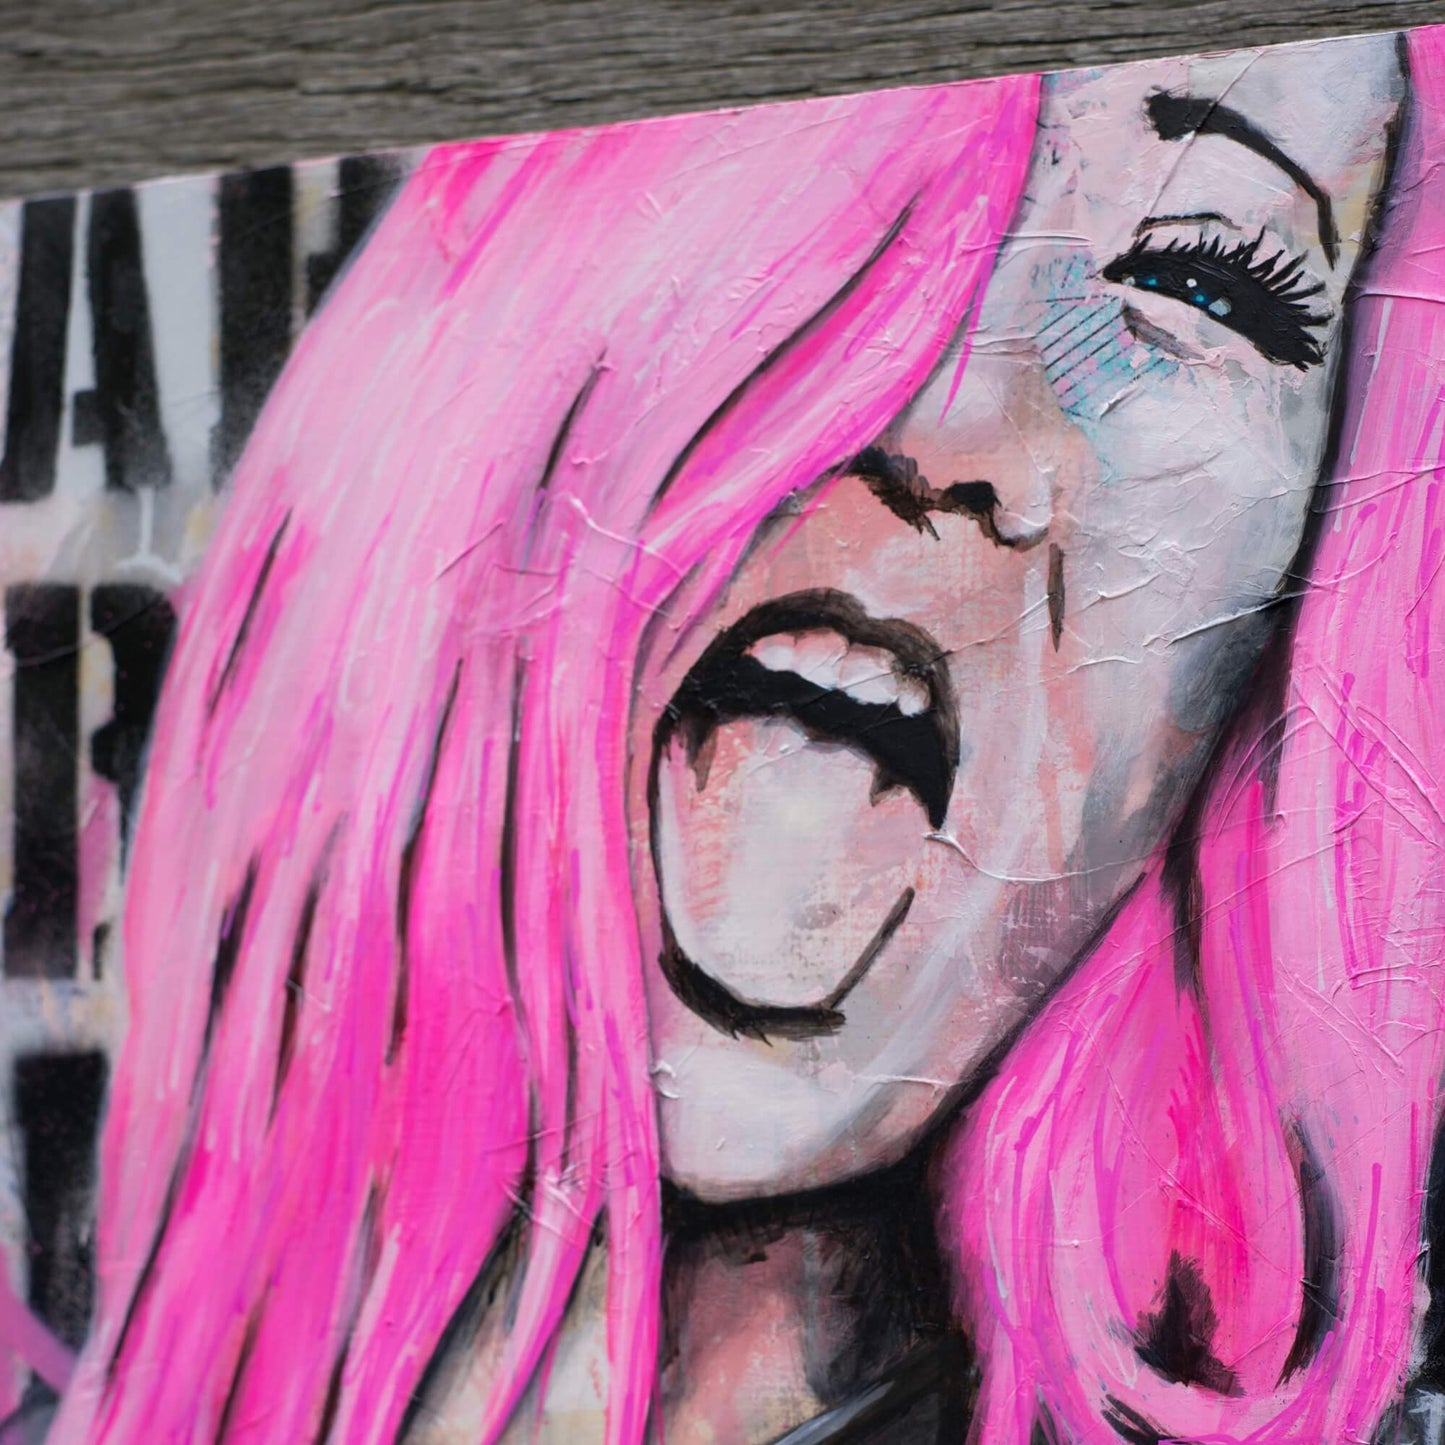 Artworks for Sale – Street Art Style Painting of a Woman – Hot Pink & Black Art – 'White Noise' – Art Wall Painting Criss Chaney